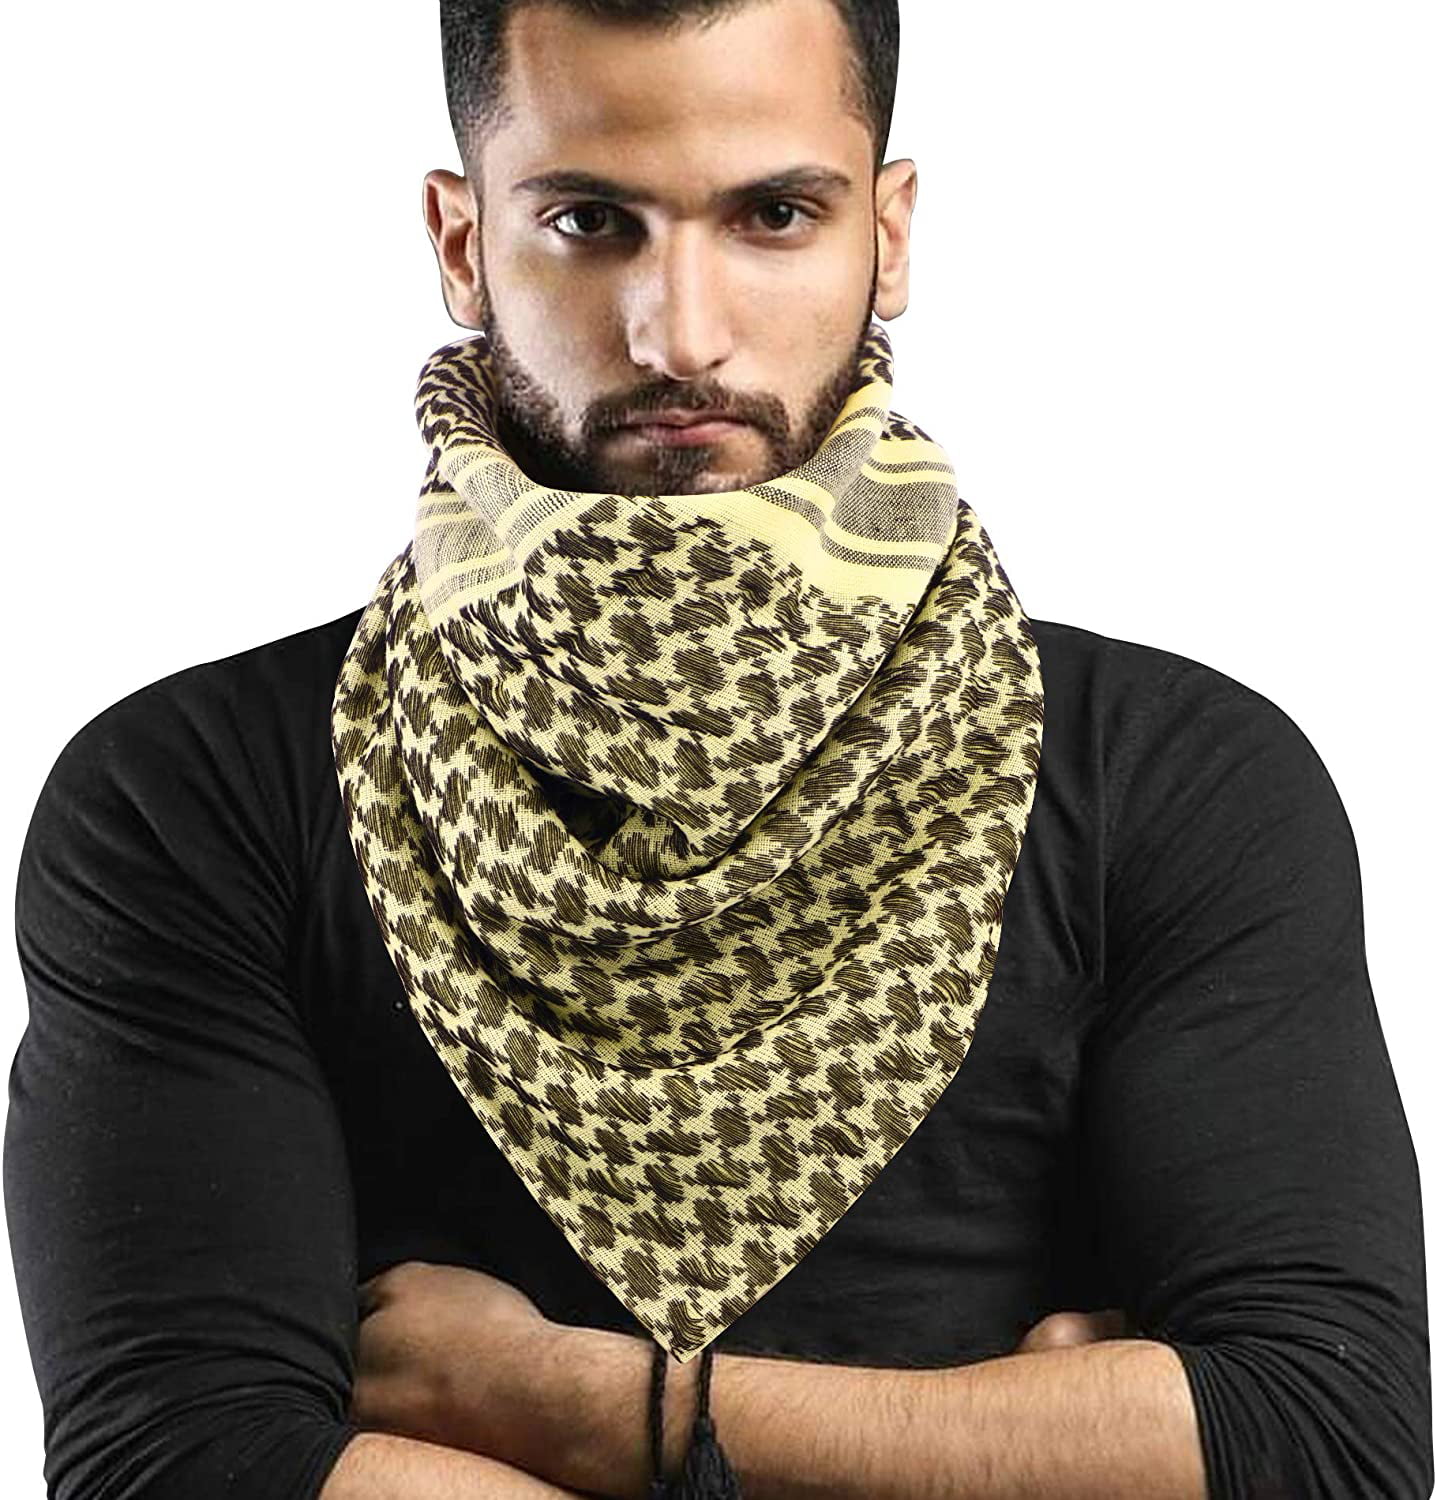 Holly LifePro 100% Head Neck Cotton Shemagh Arab Military Keffiyeh Tactical Desert Scarf Wrap with Tassels for Women and Men 